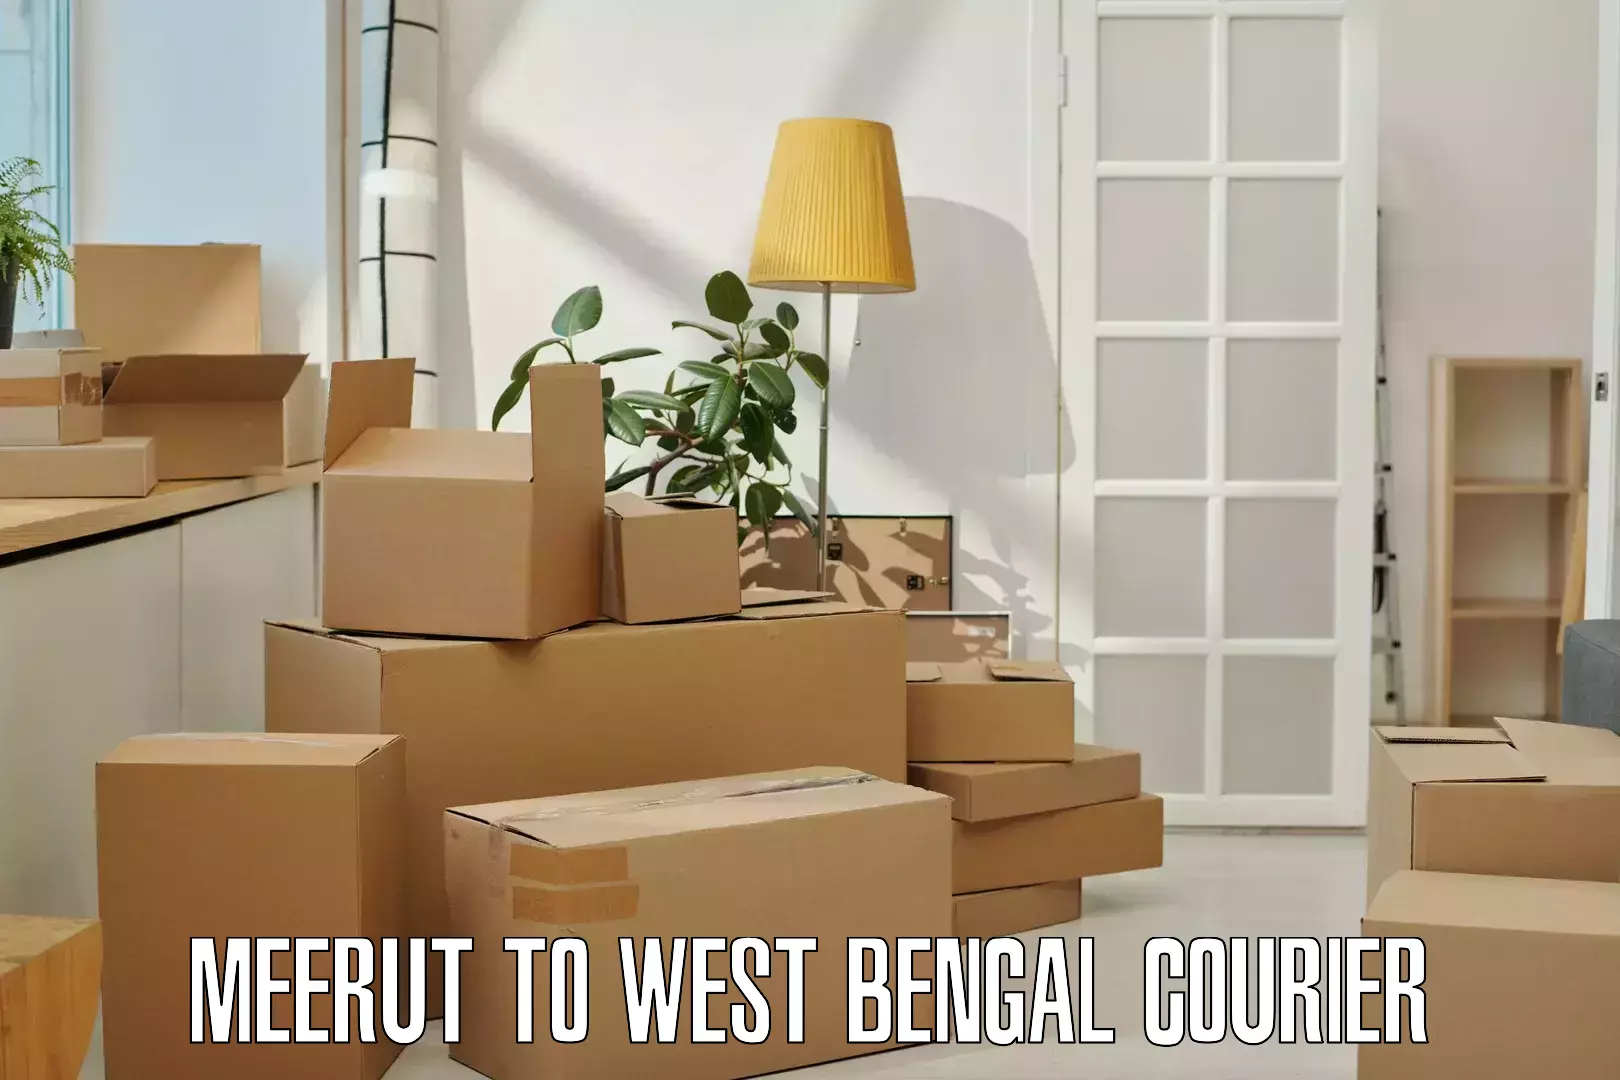 Comprehensive shipping network Meerut to Titagarh